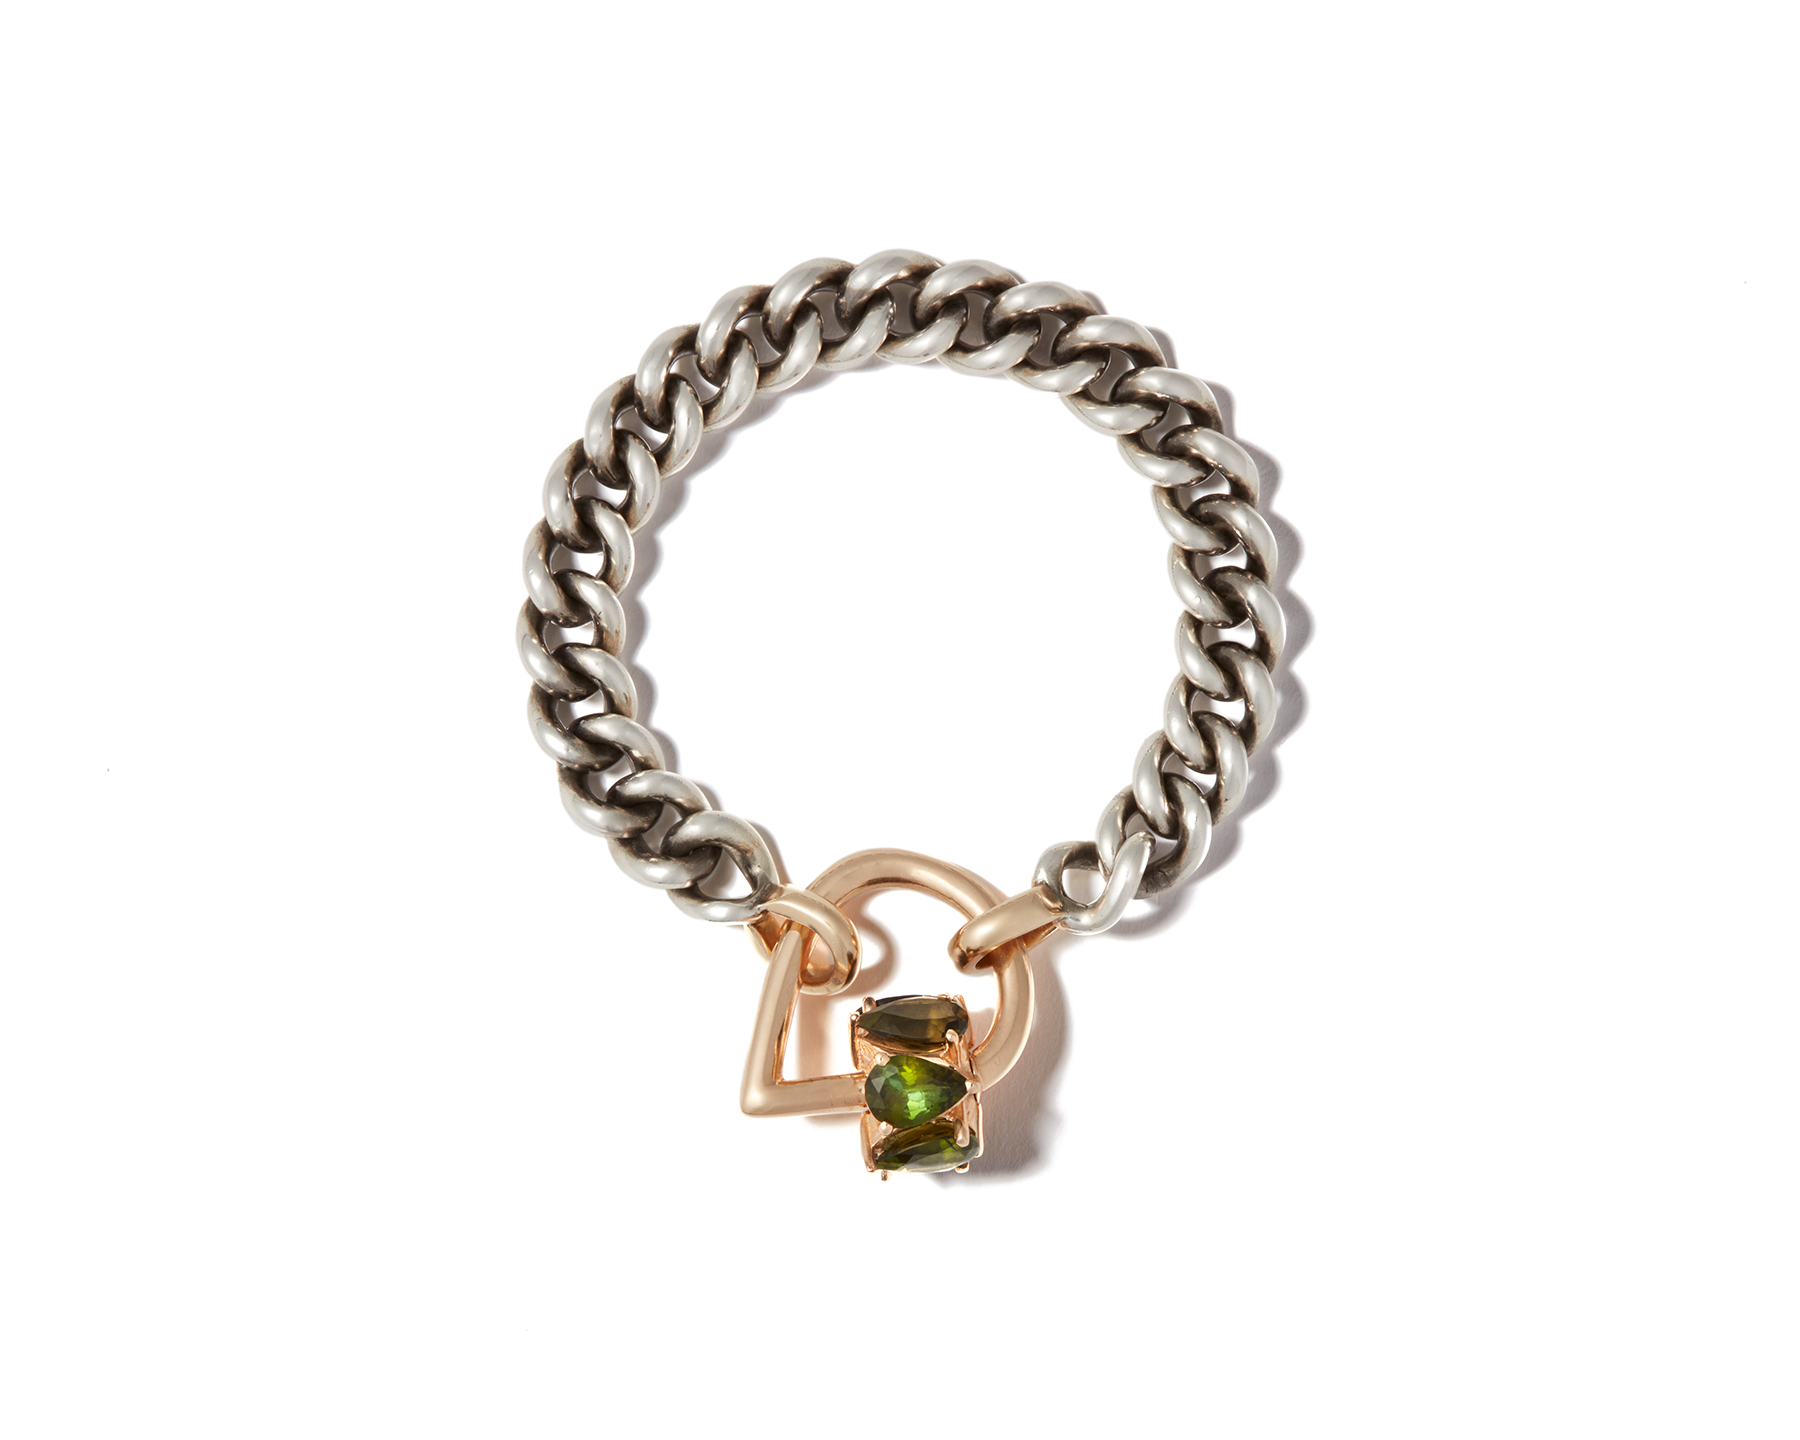 Gold droplock charm with green gemstones attached to silver chain bracelet